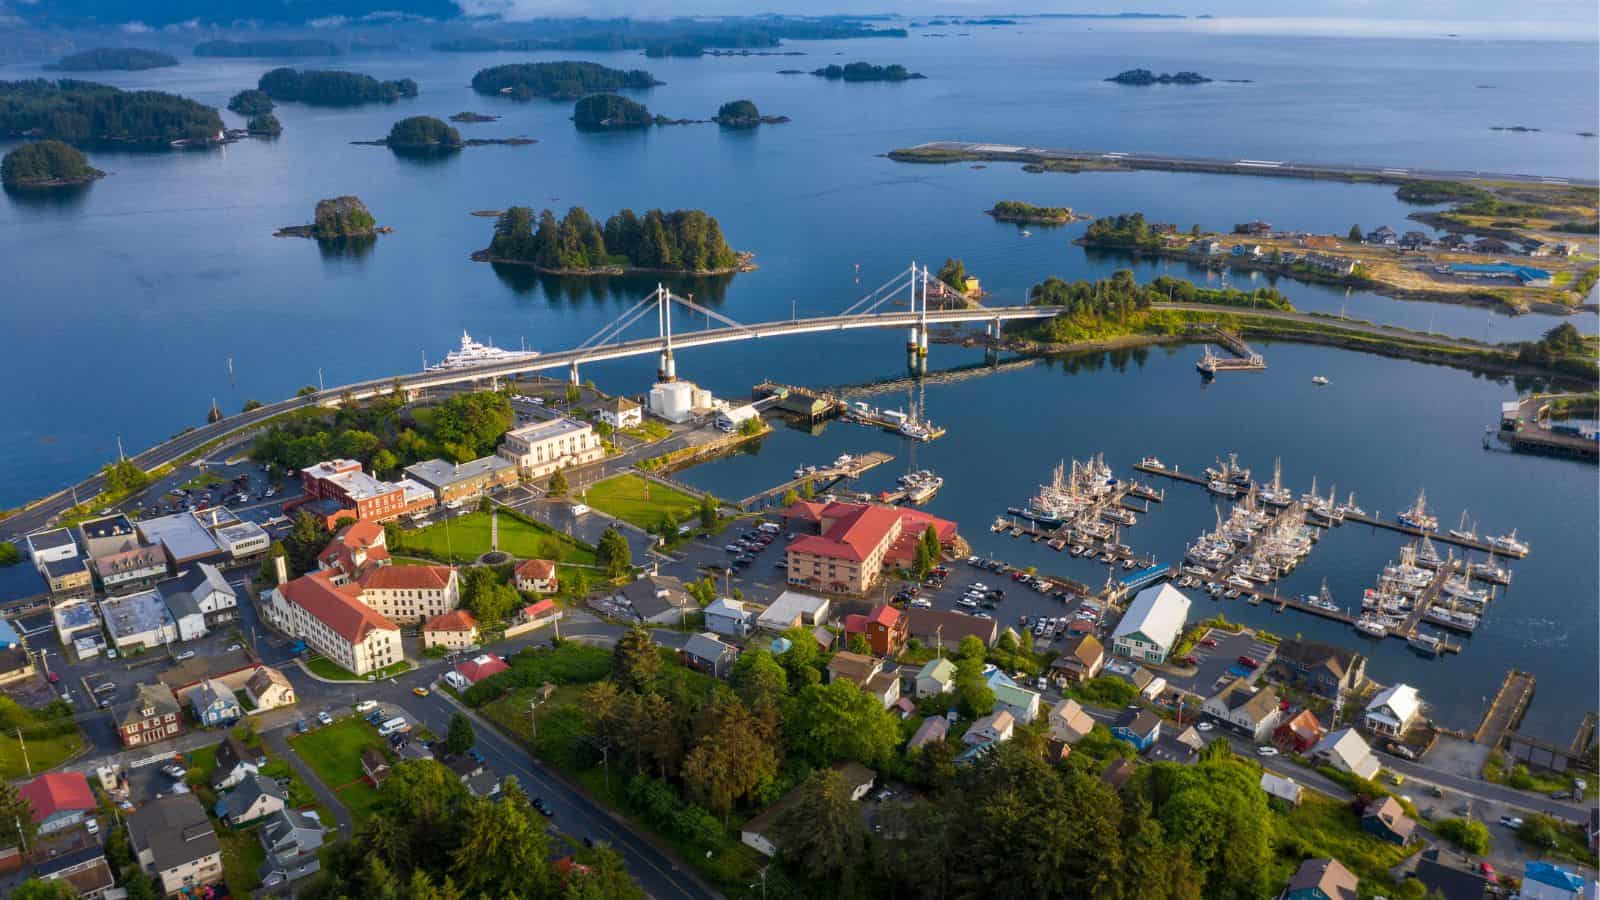 <p>Sitka is one of the most remote locations in the US, home to a population of under 9000. It’s the former capital of Russian Alaska and is still deeply connected to Russian heritage. Sitka is also home to various wildlife spectacles, such as brown bears, humpback whales, and bald eagles.</p>